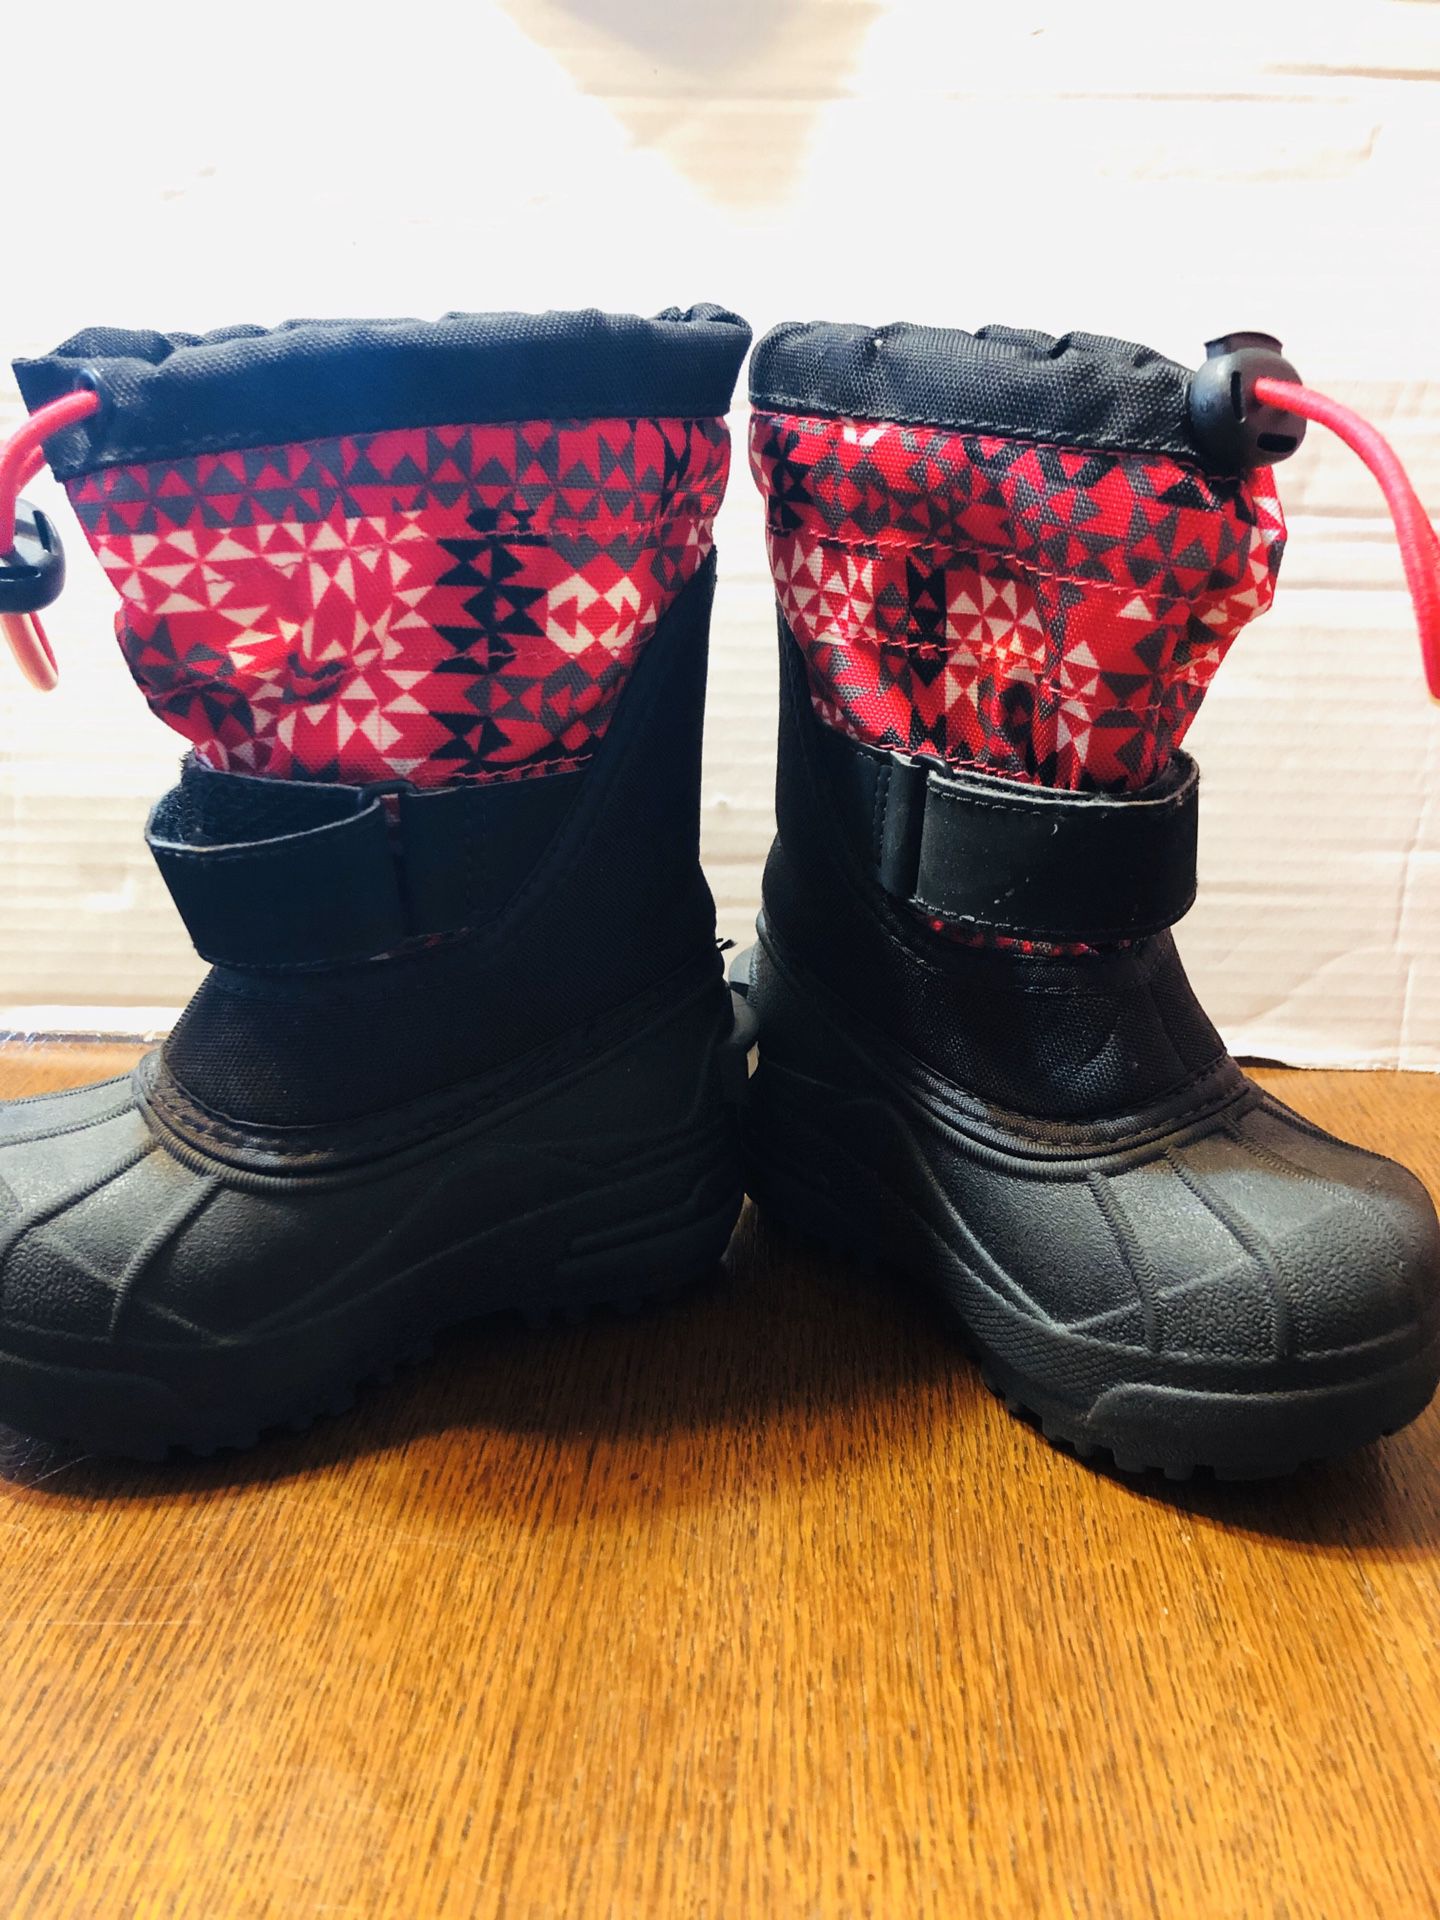 Girls Toddler Boots Columbia Size 7